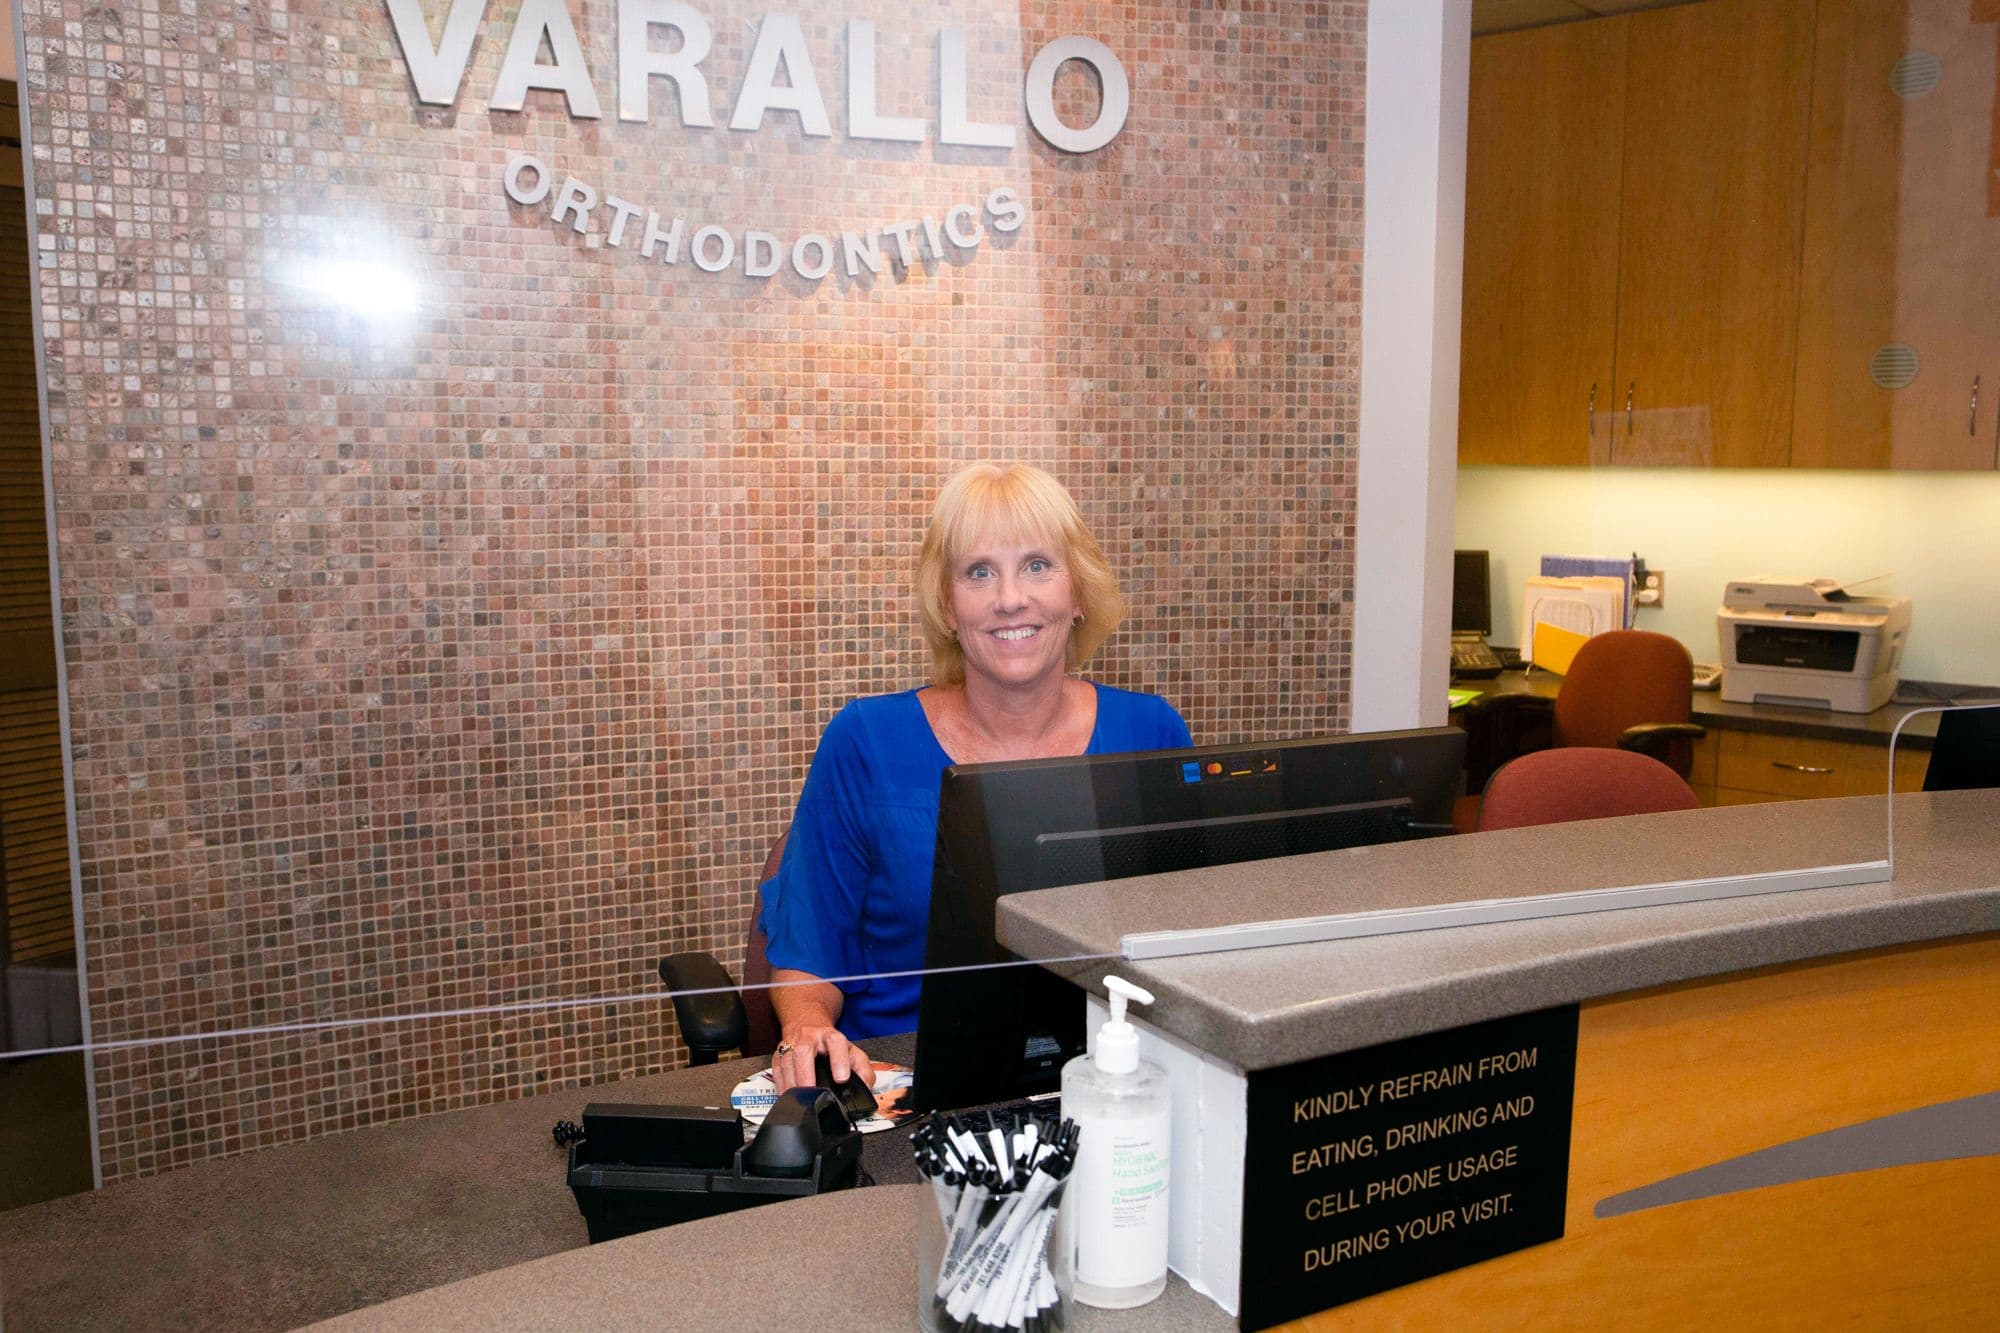 man smiling during consultation with dr. varallo